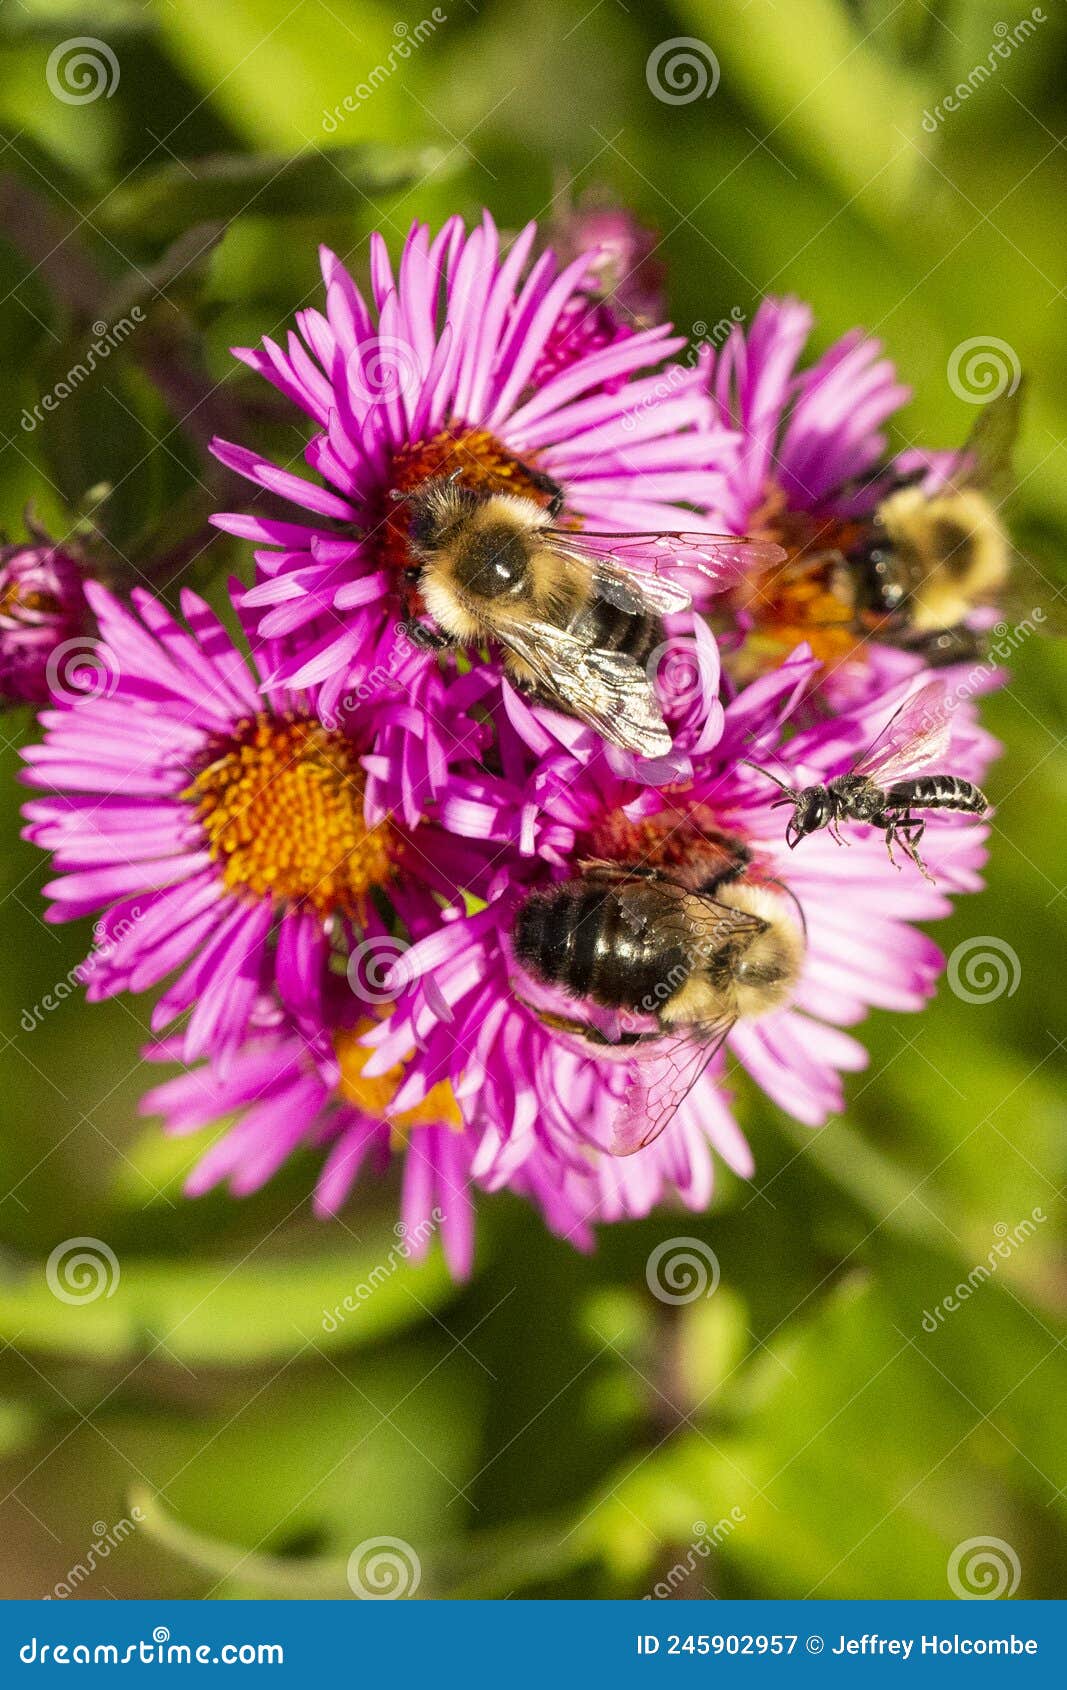 Bees On Pink Aster Flowers In Newbury New Hampshire Stock Image